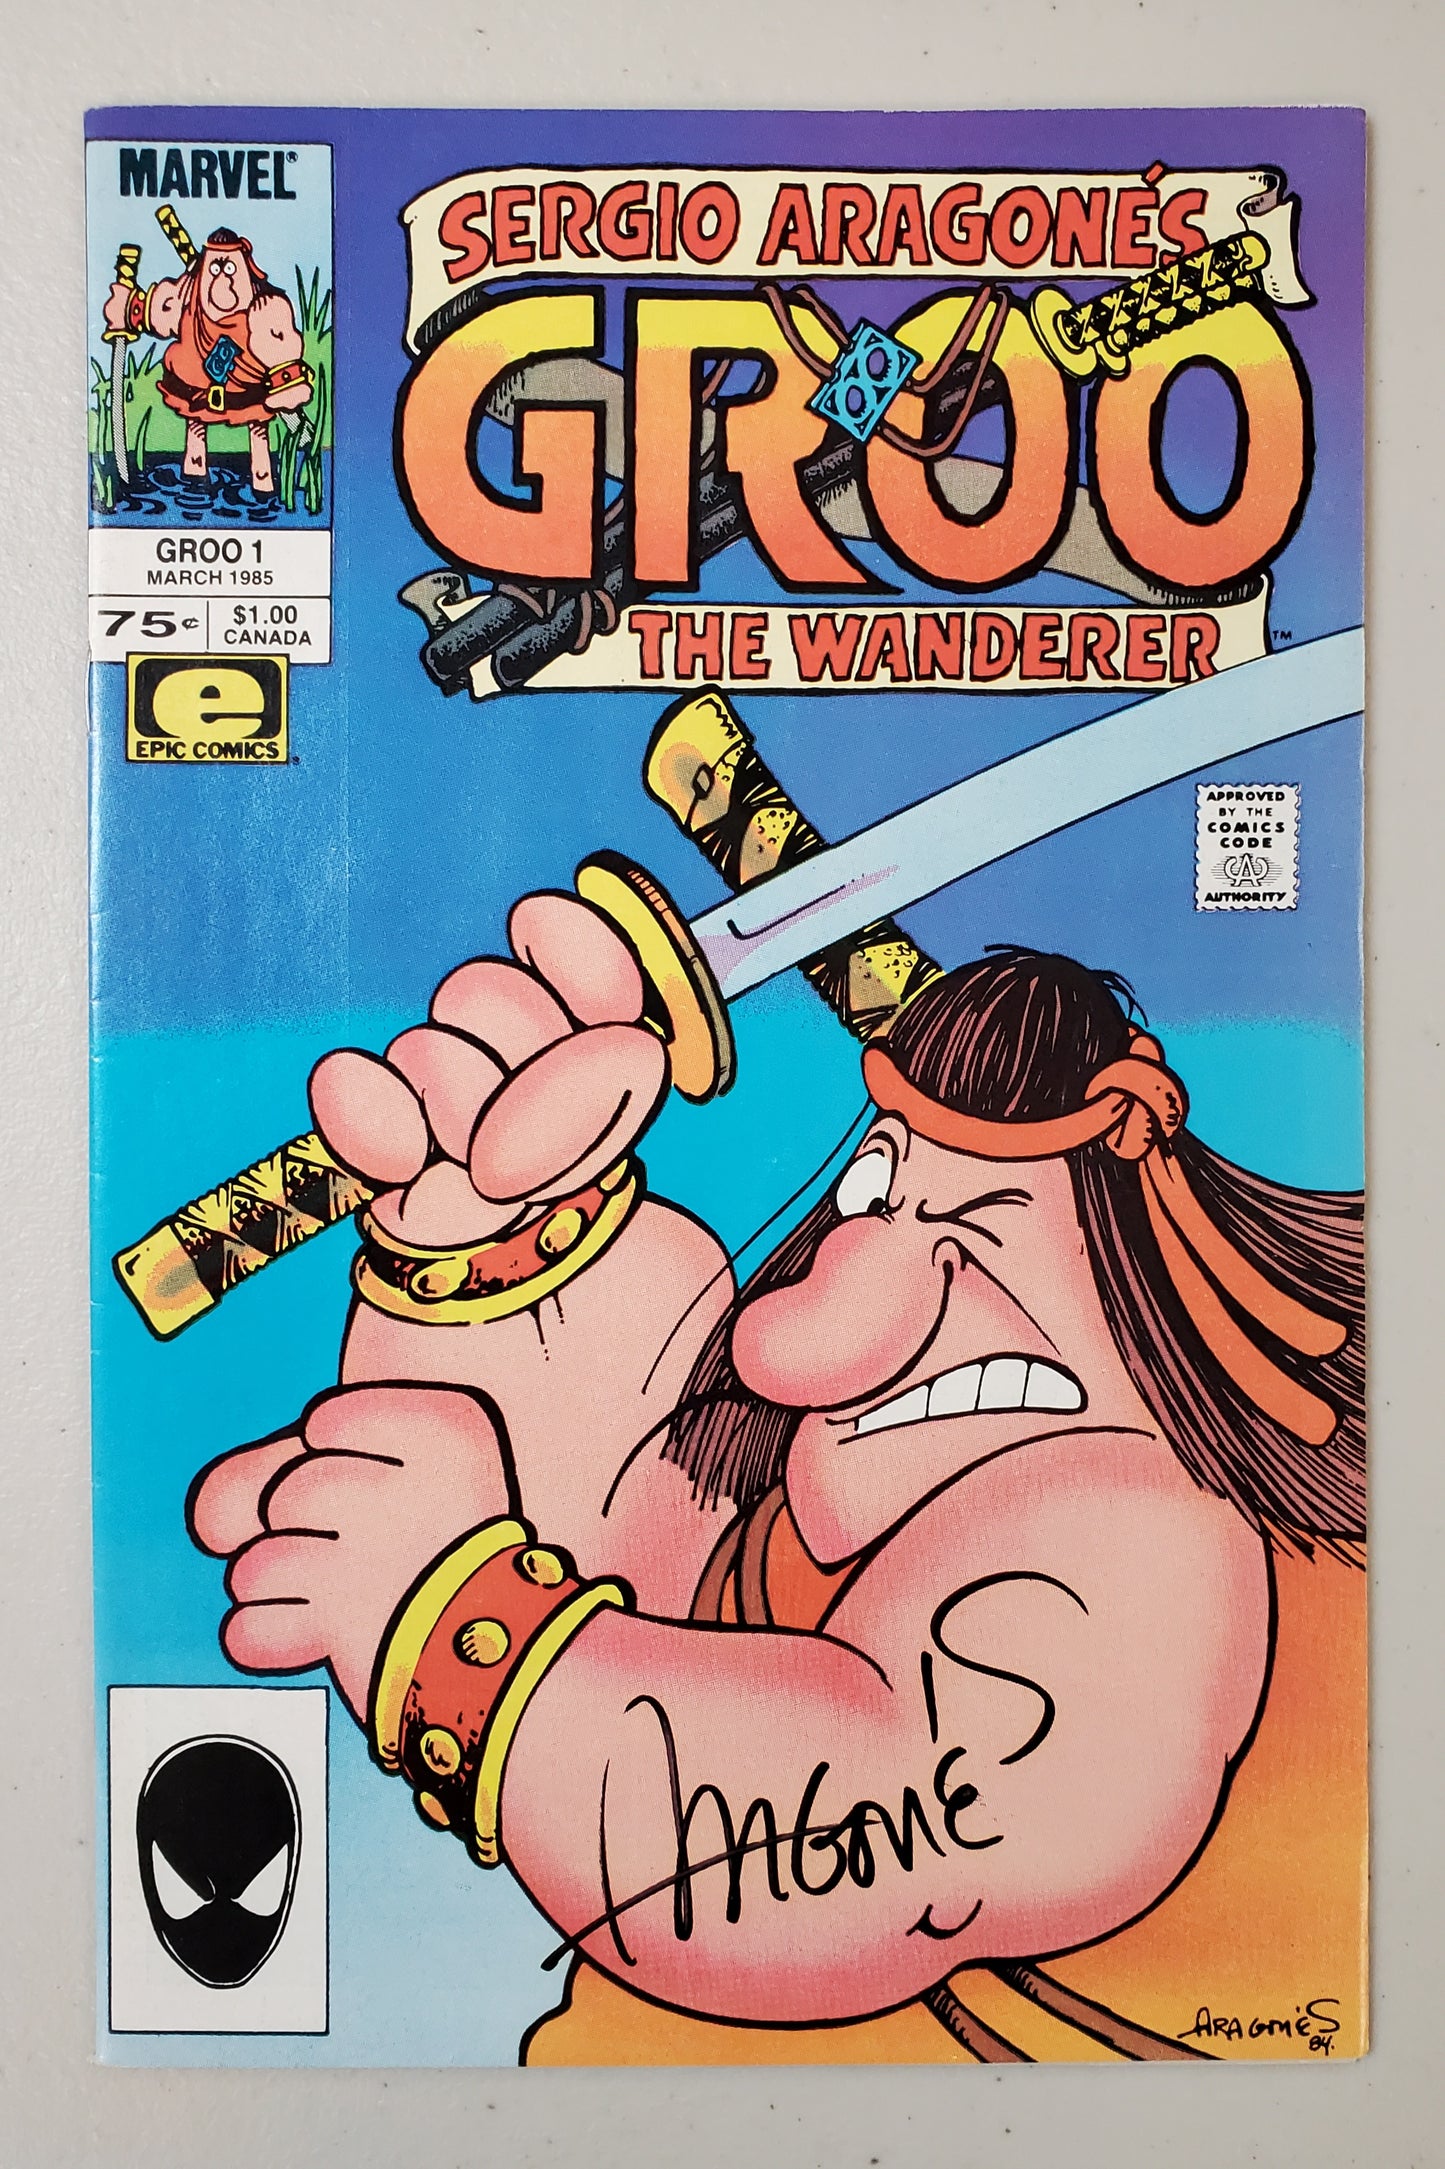 GROO THE WANDERER #1 SIGNED BY SERGIO ARAGONES